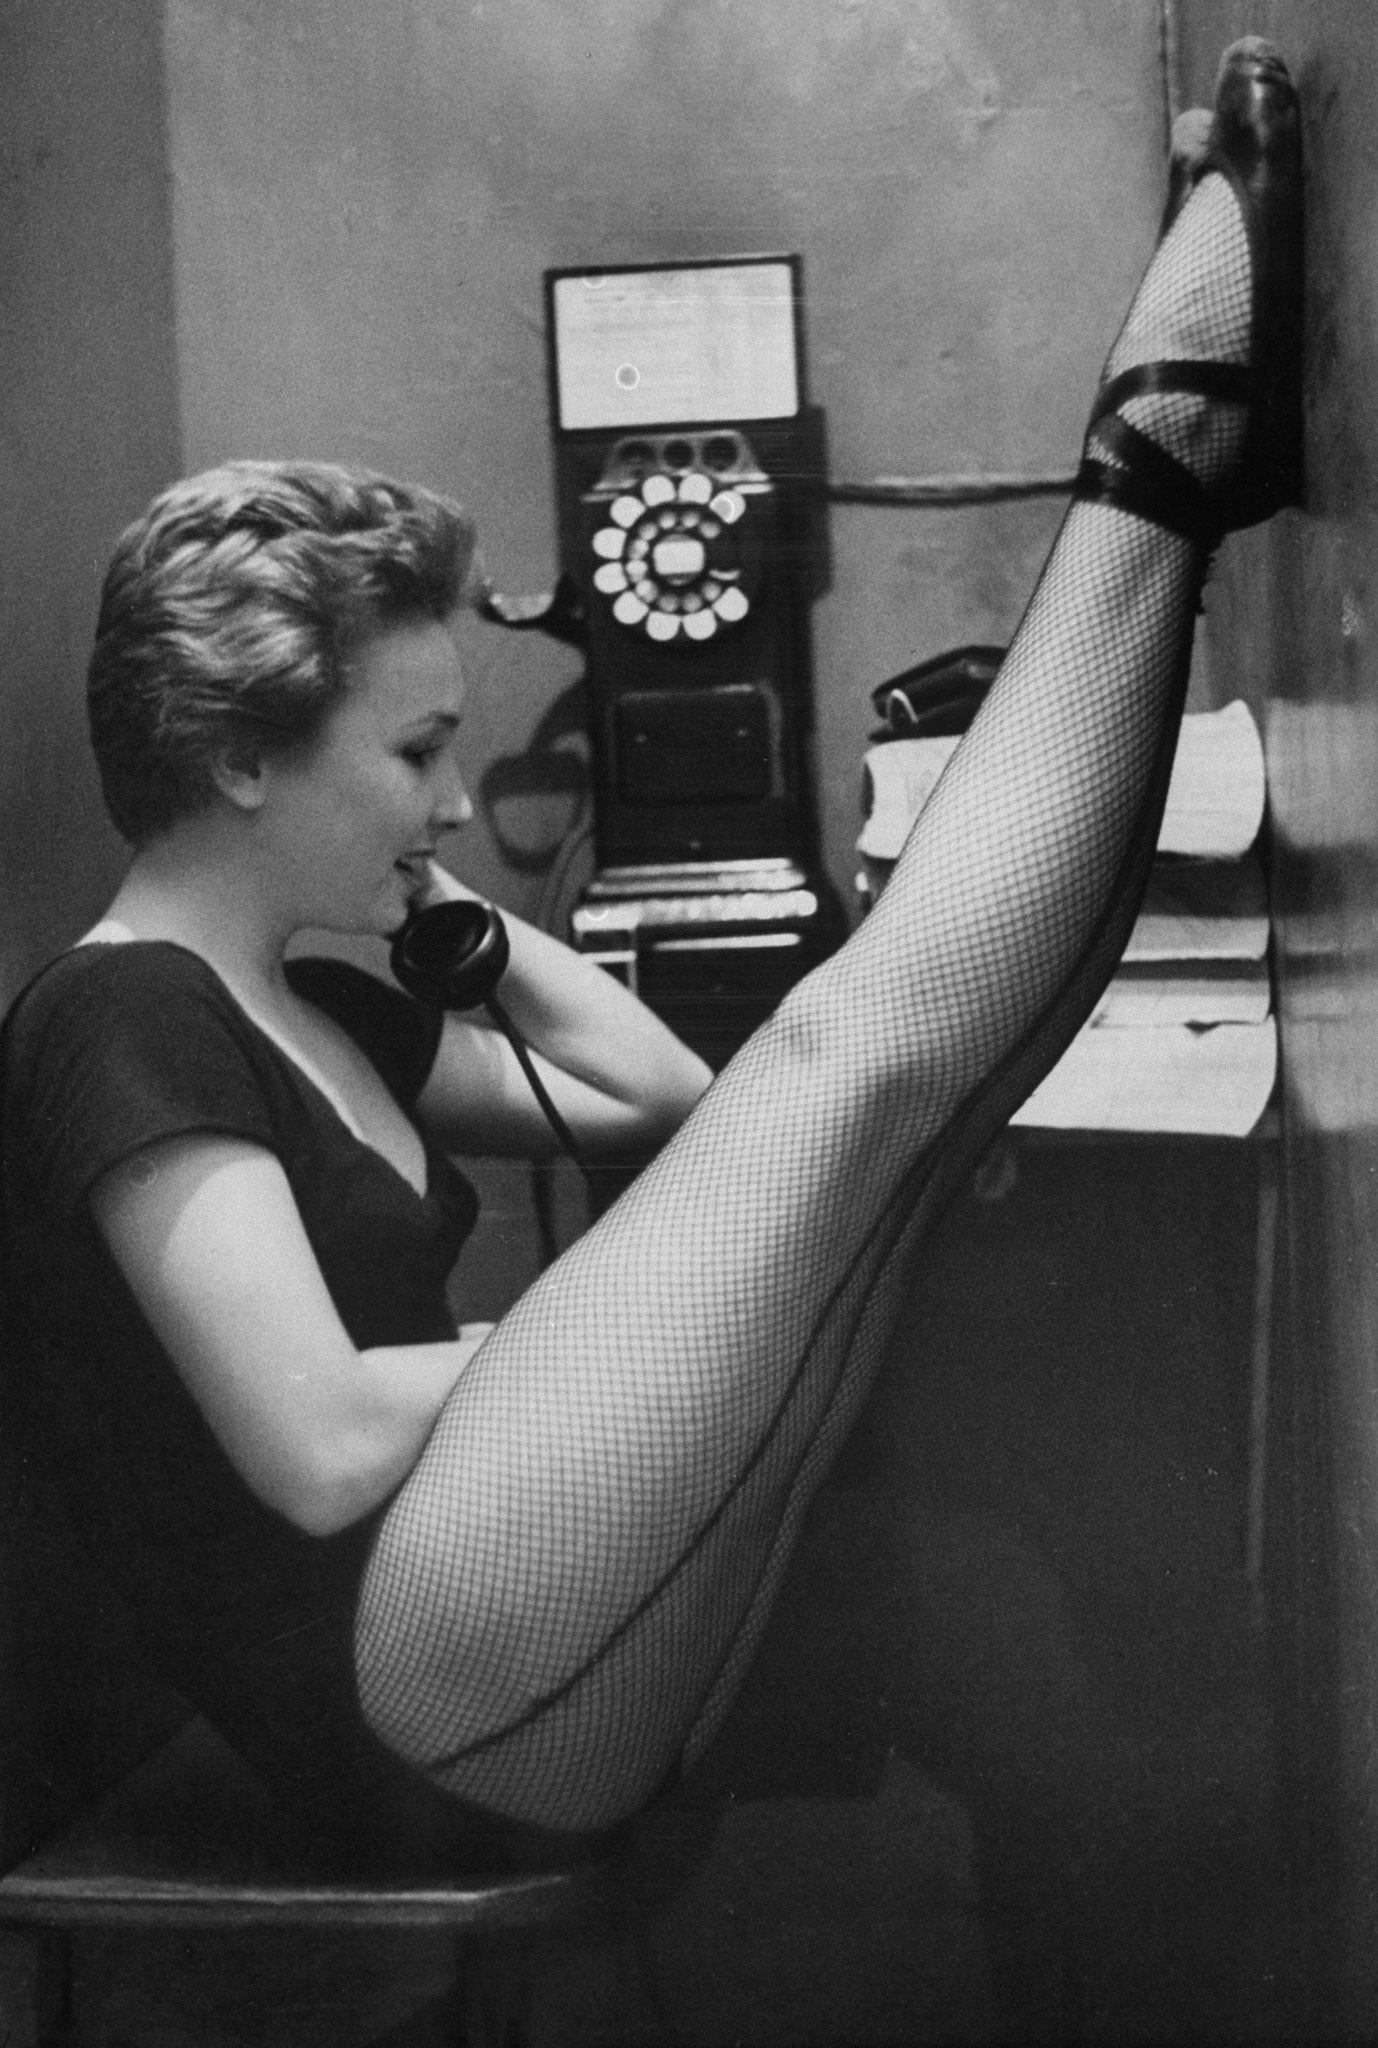 Dancer Mary Ellen Terry talking with her legs up in telephone booth, 1952.